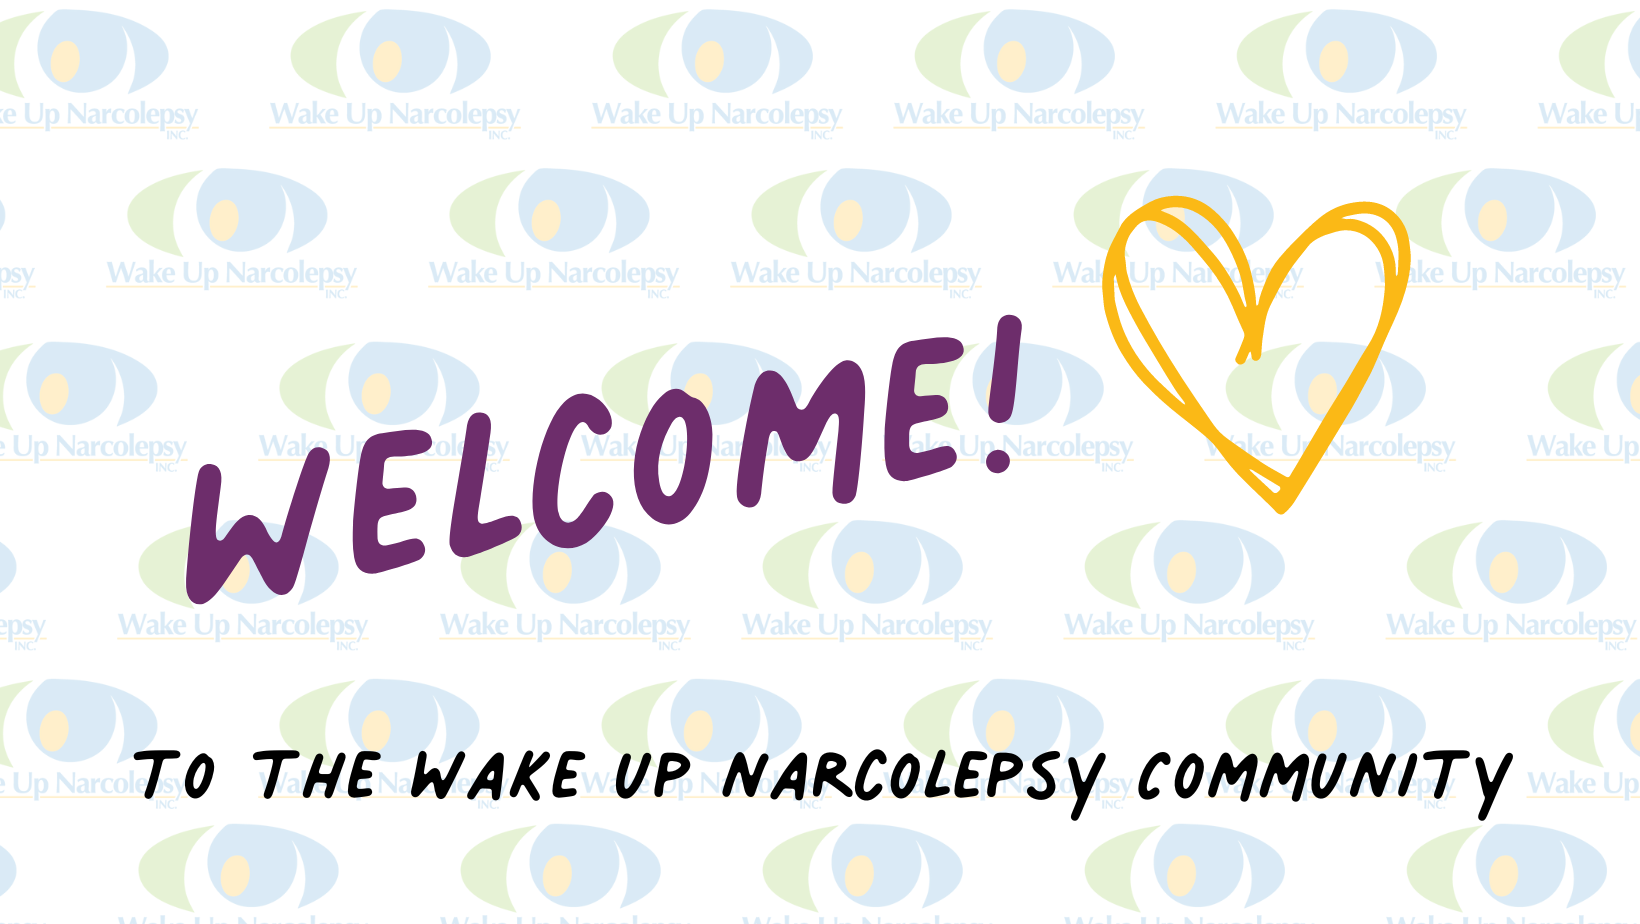 Welcome to the Wake Up Narcolepsy Community